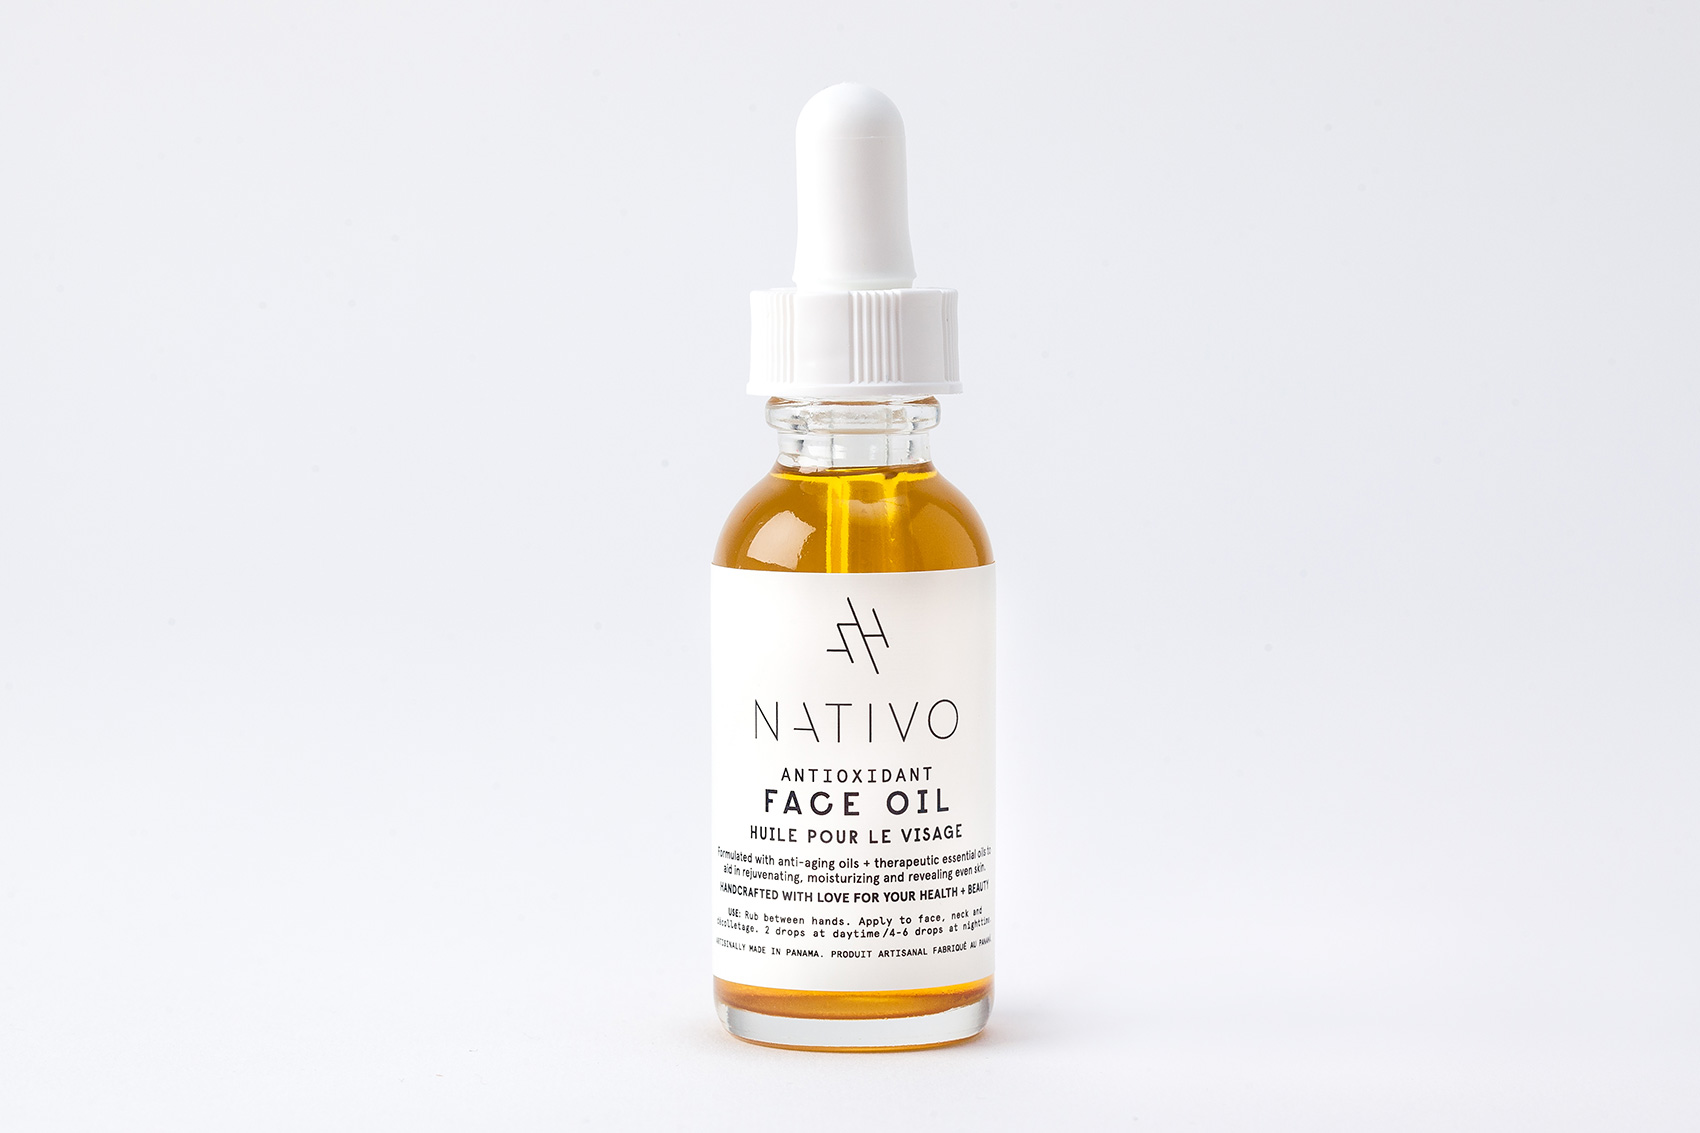 Nativo packaging for Face Oil designed by Stellar Studio